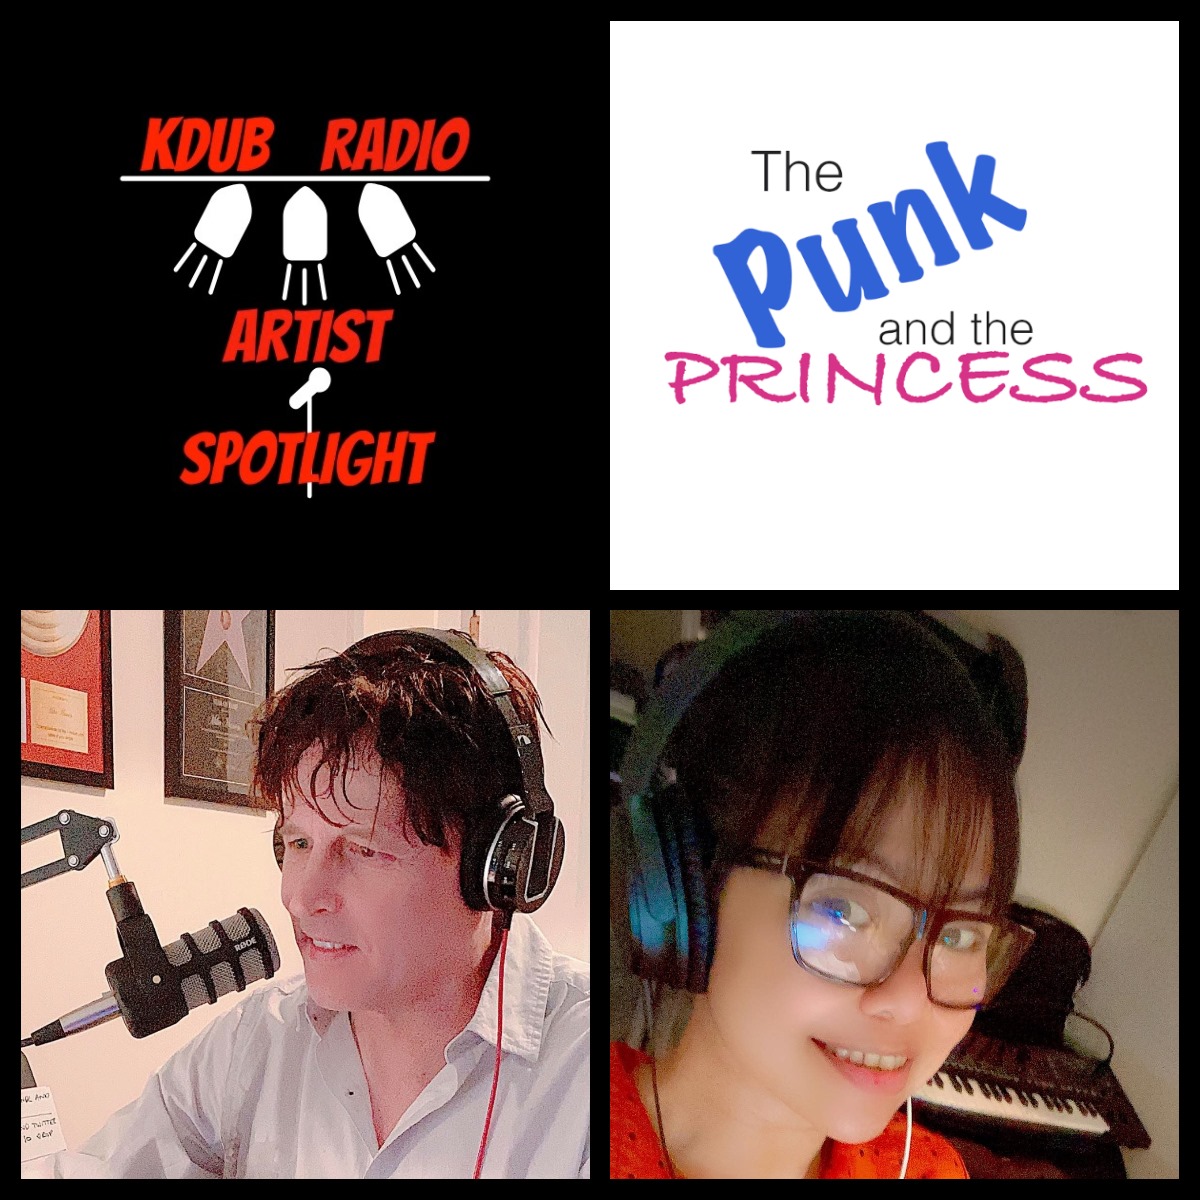 Join us tonight at 8 pm EST for The Punk and the Princess Radio Show. You can catch it on KDUB Radio's Artist Spotlight, the extension of KDUB Radio kdubradio.com/artist-spotlig… @PunkandPrincess @BDub1199